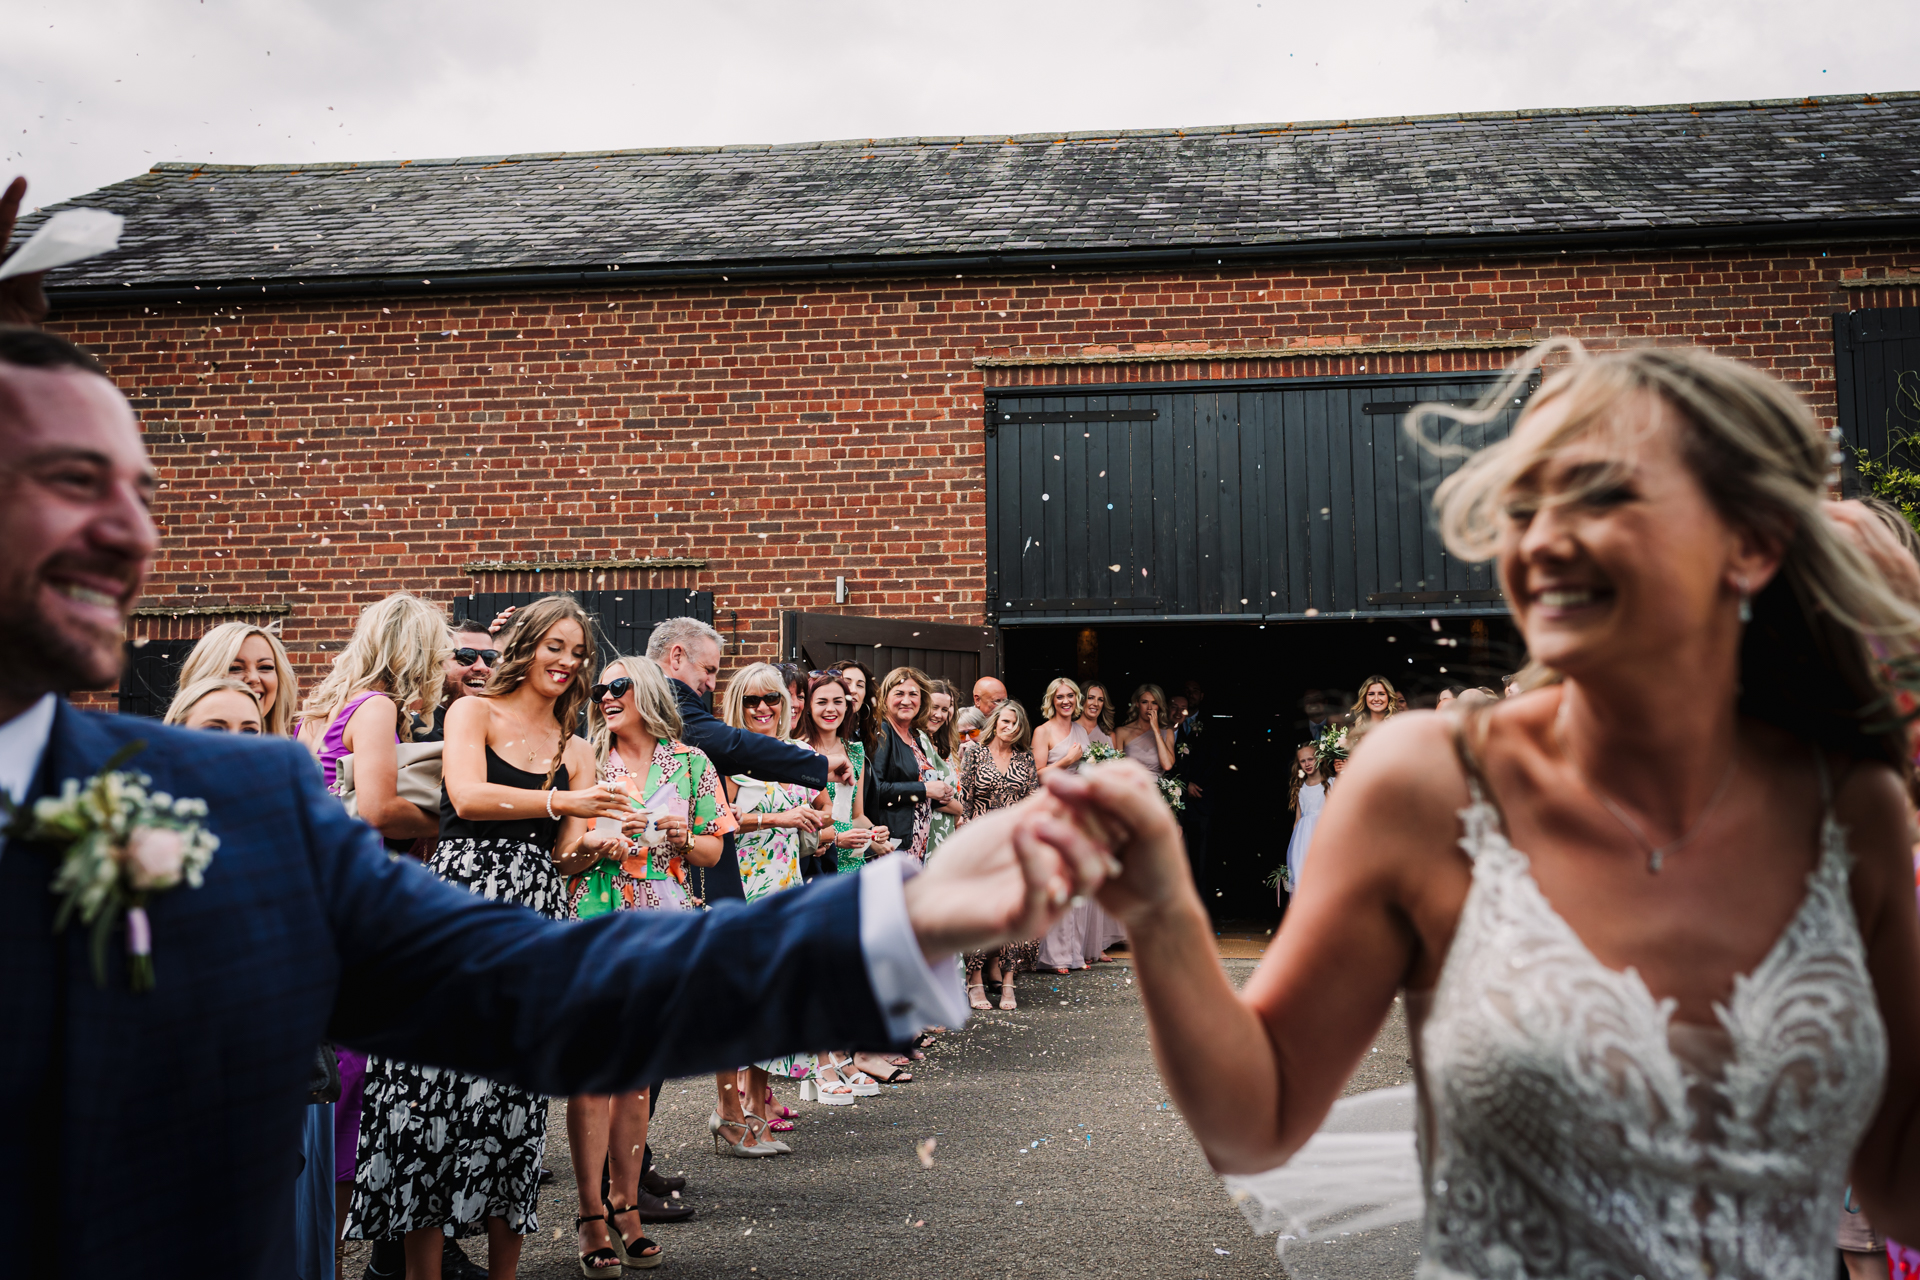 Guests throw confetti stood out side the oak barn at Milling Barn